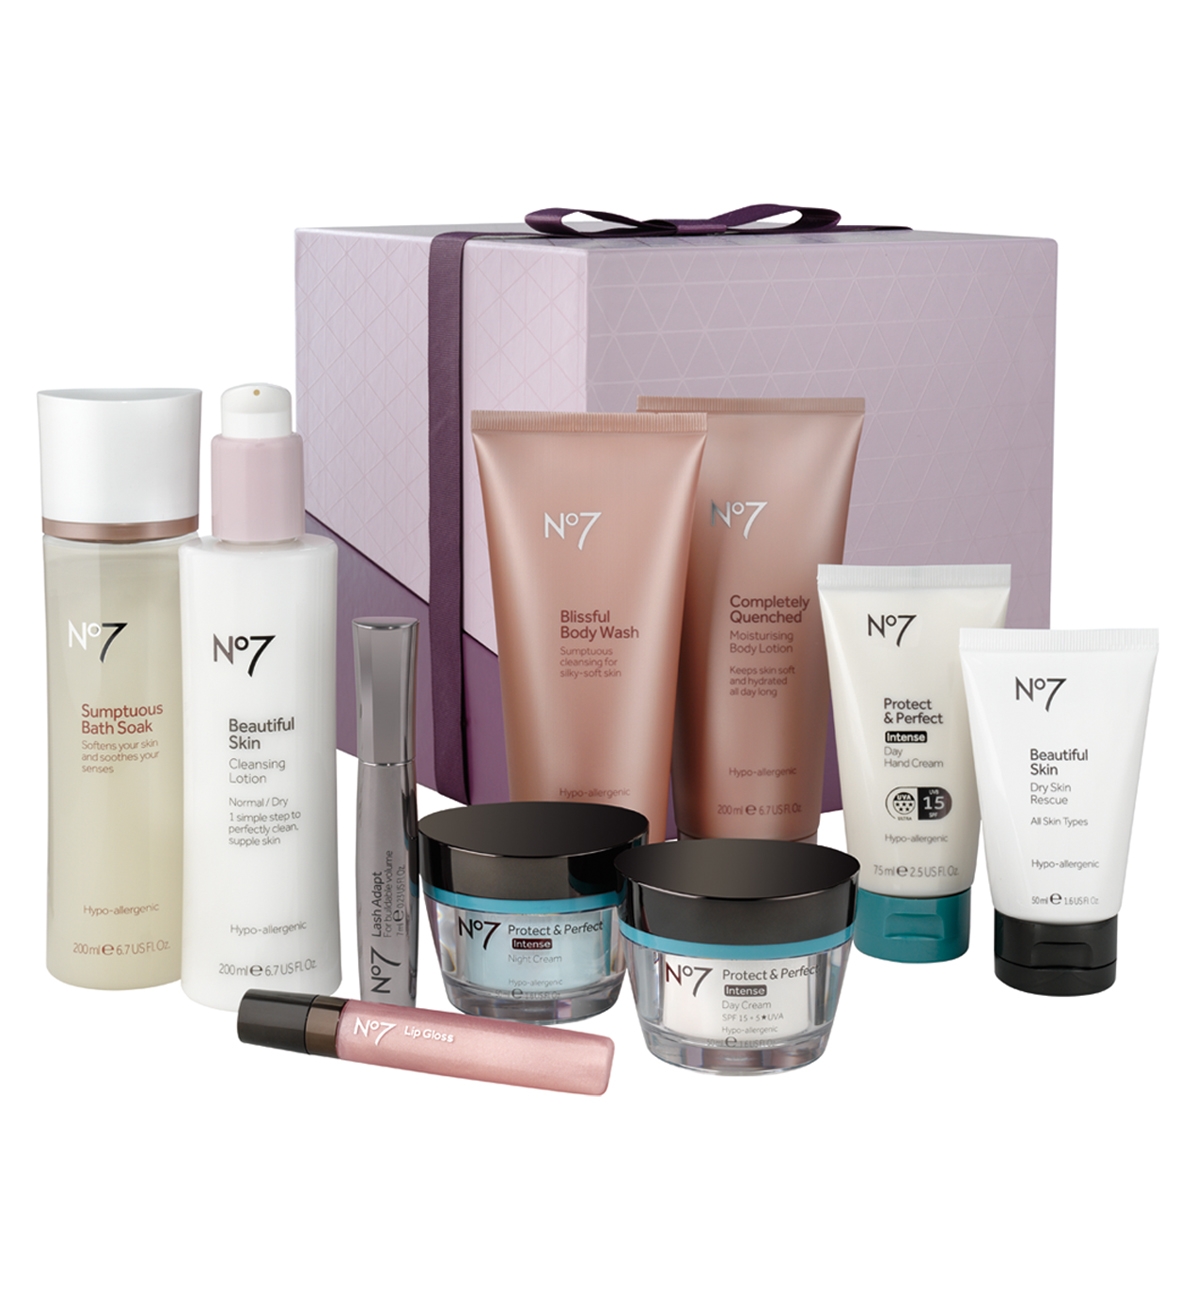 boots gift set offers